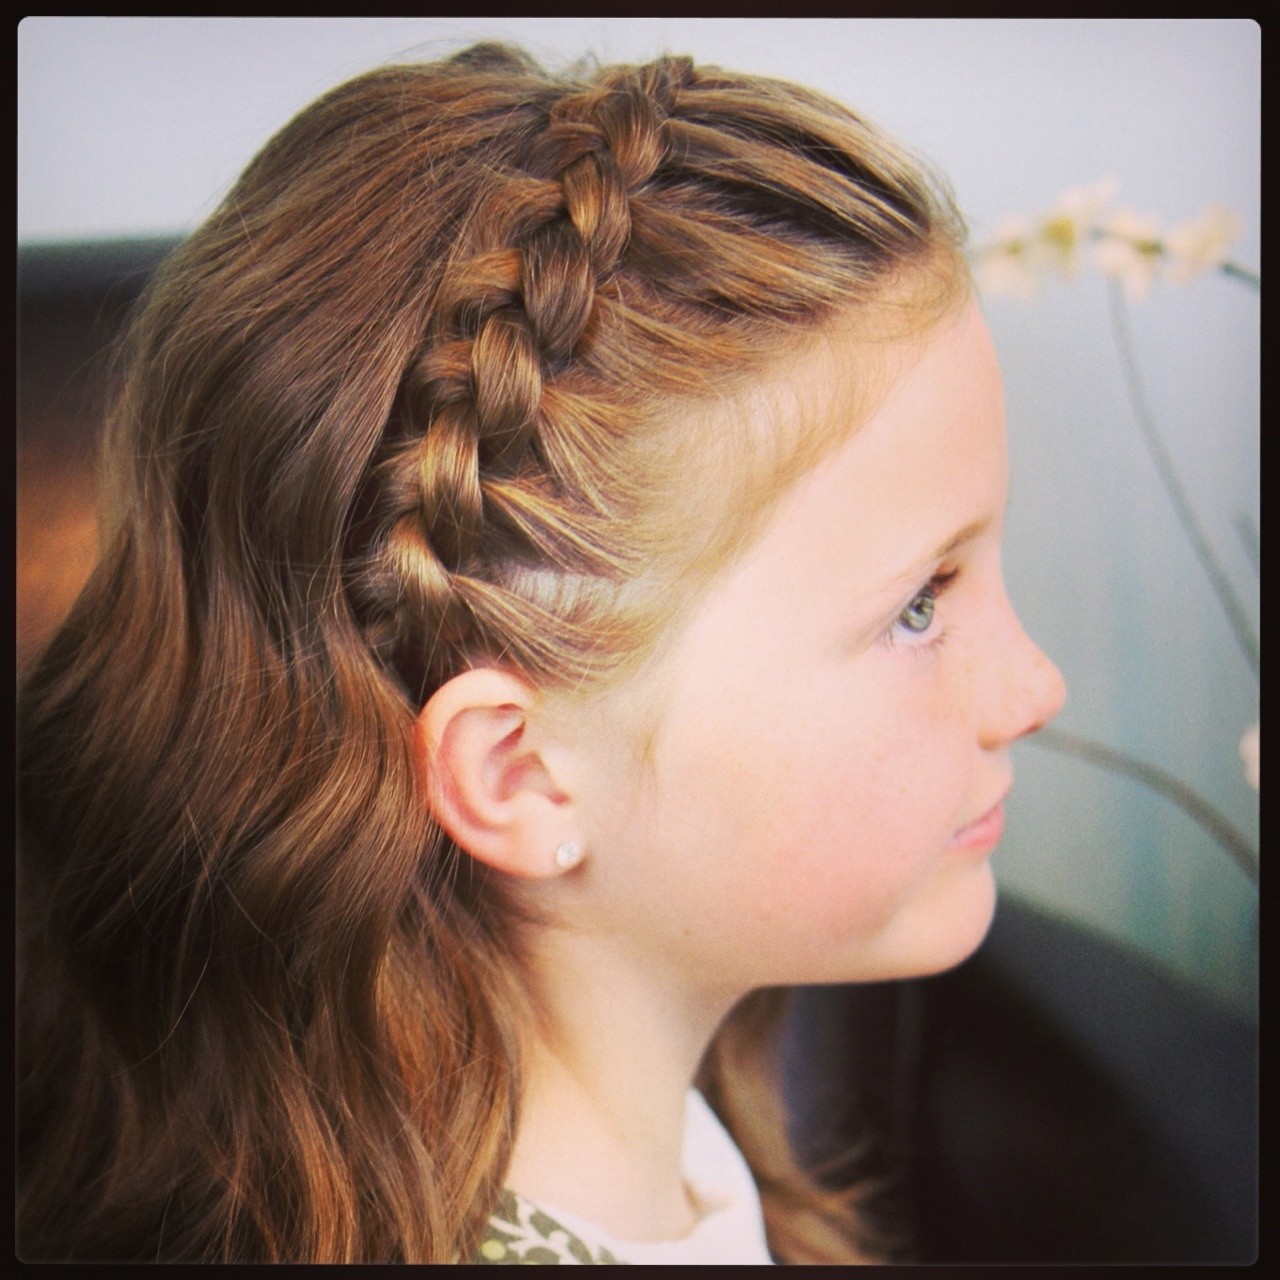 25 Hairstyles For Girls To Try In 2015 - The Xerxes